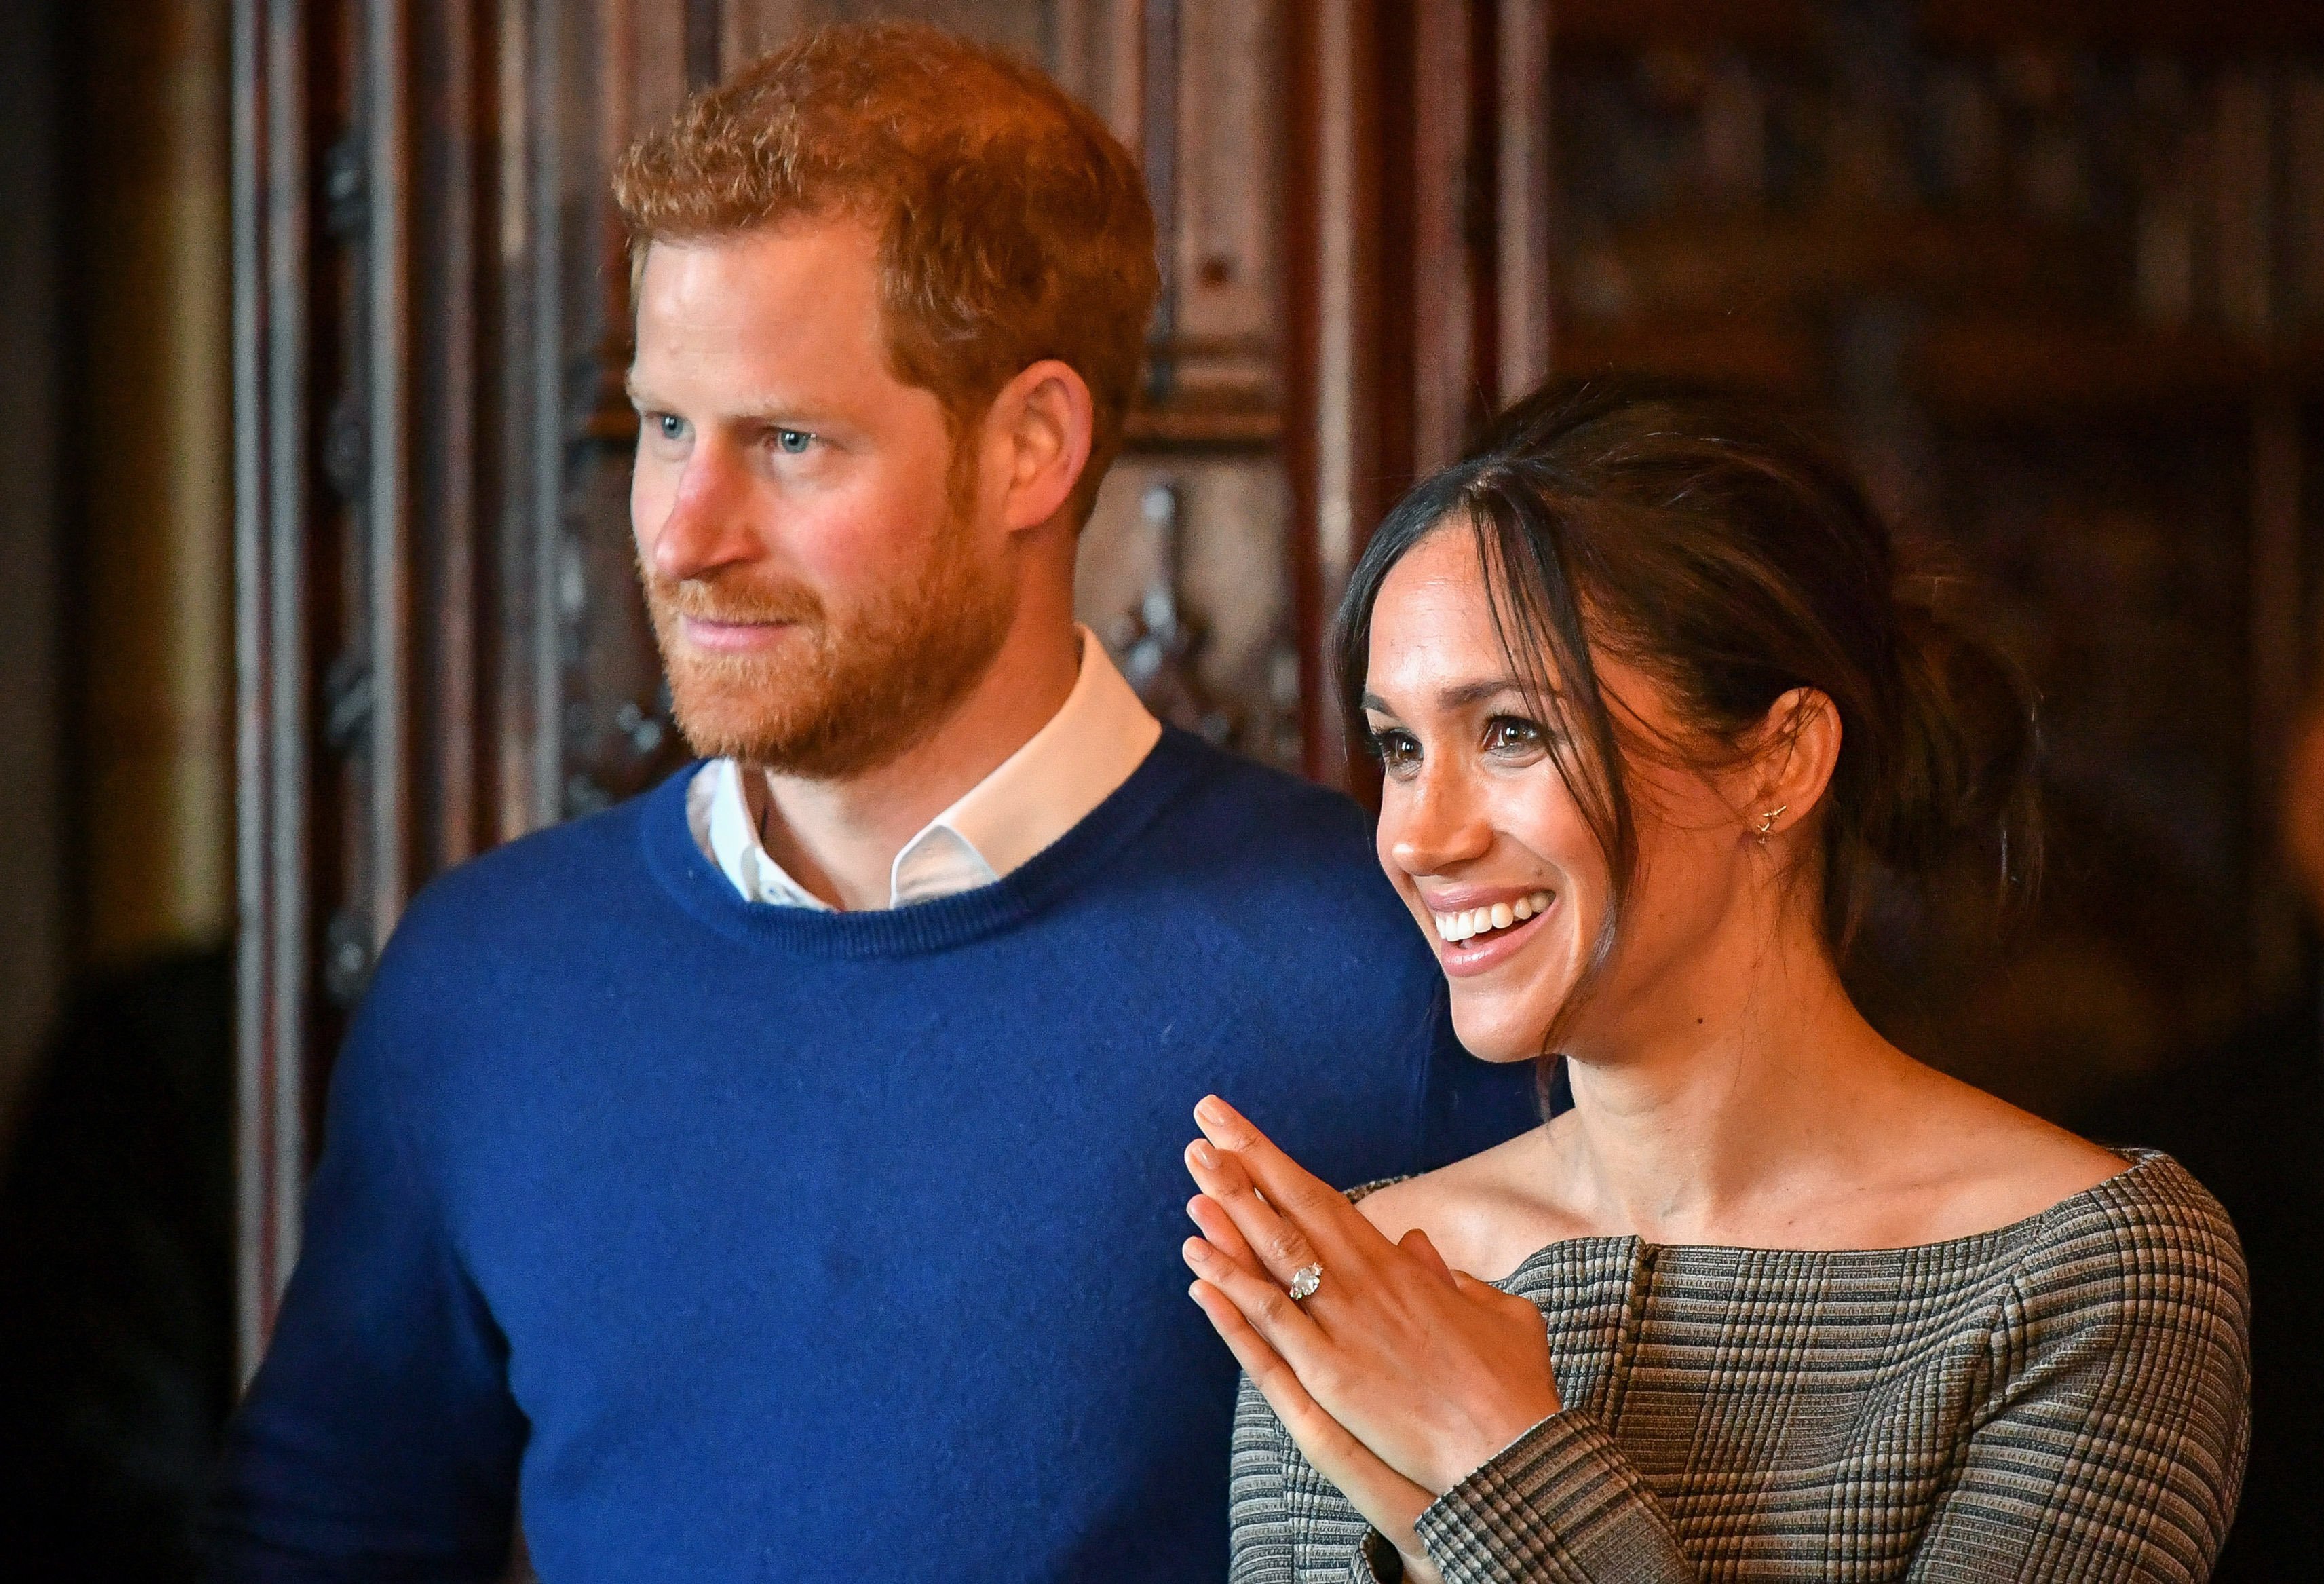 Prince Harry and Meghan Markle watch a performance by a Welsh choir in the banqueting hall during a visit to Cardiff Castle on January 18, 2018|Photo: Getty Images